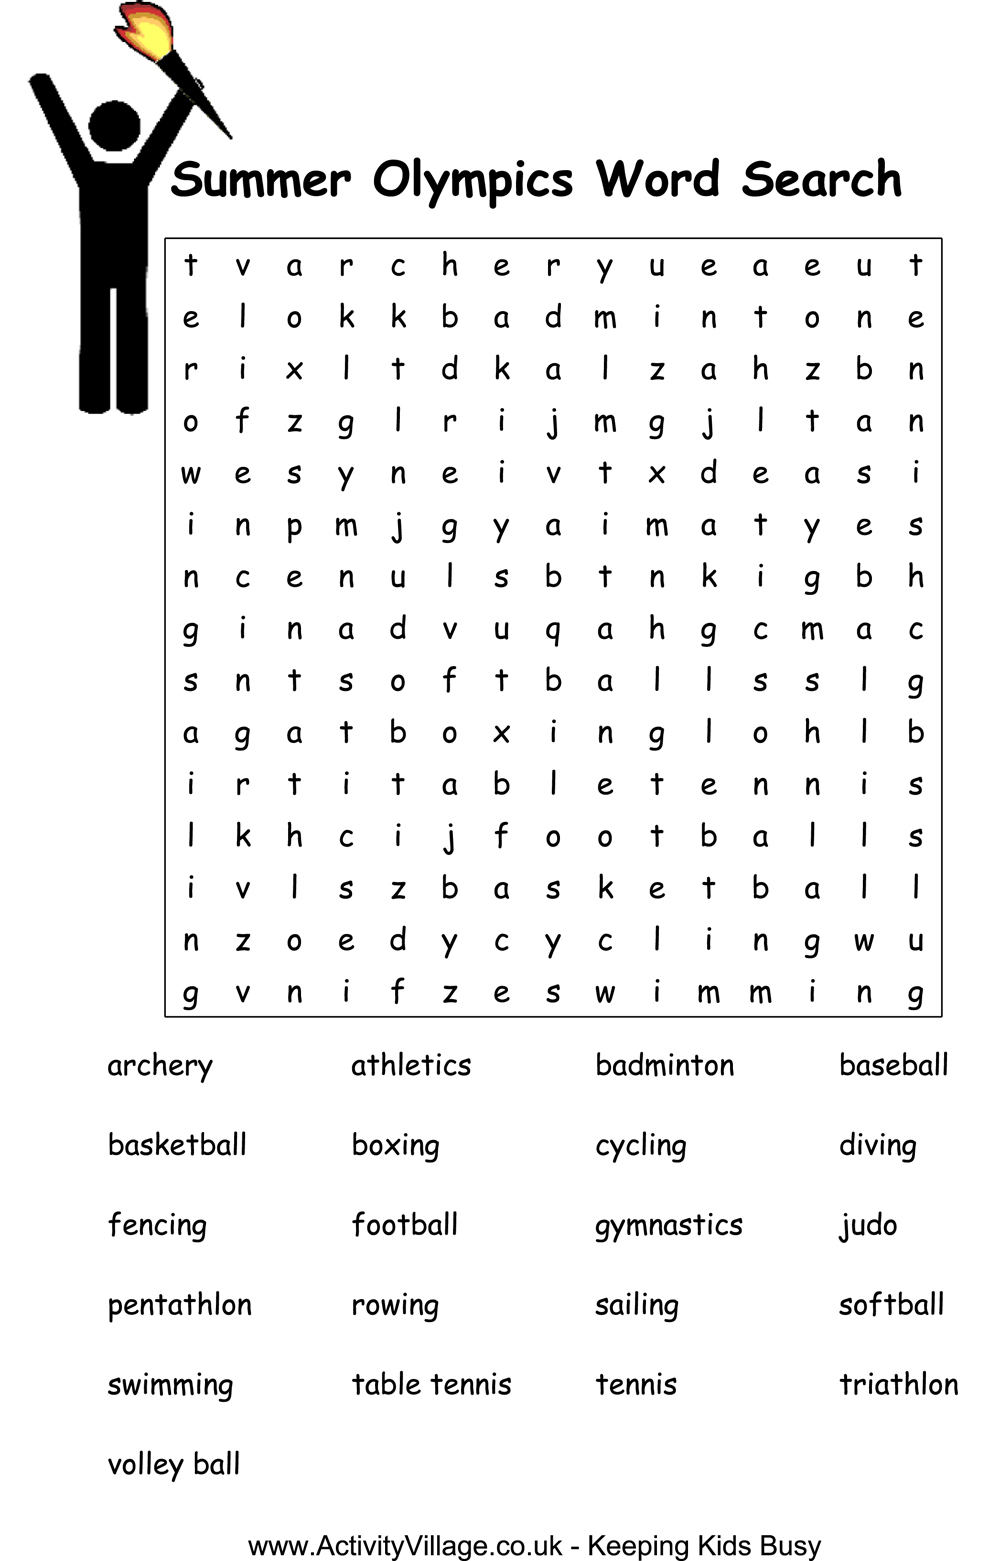 Puawai Room 17: Olympic Games Word Search